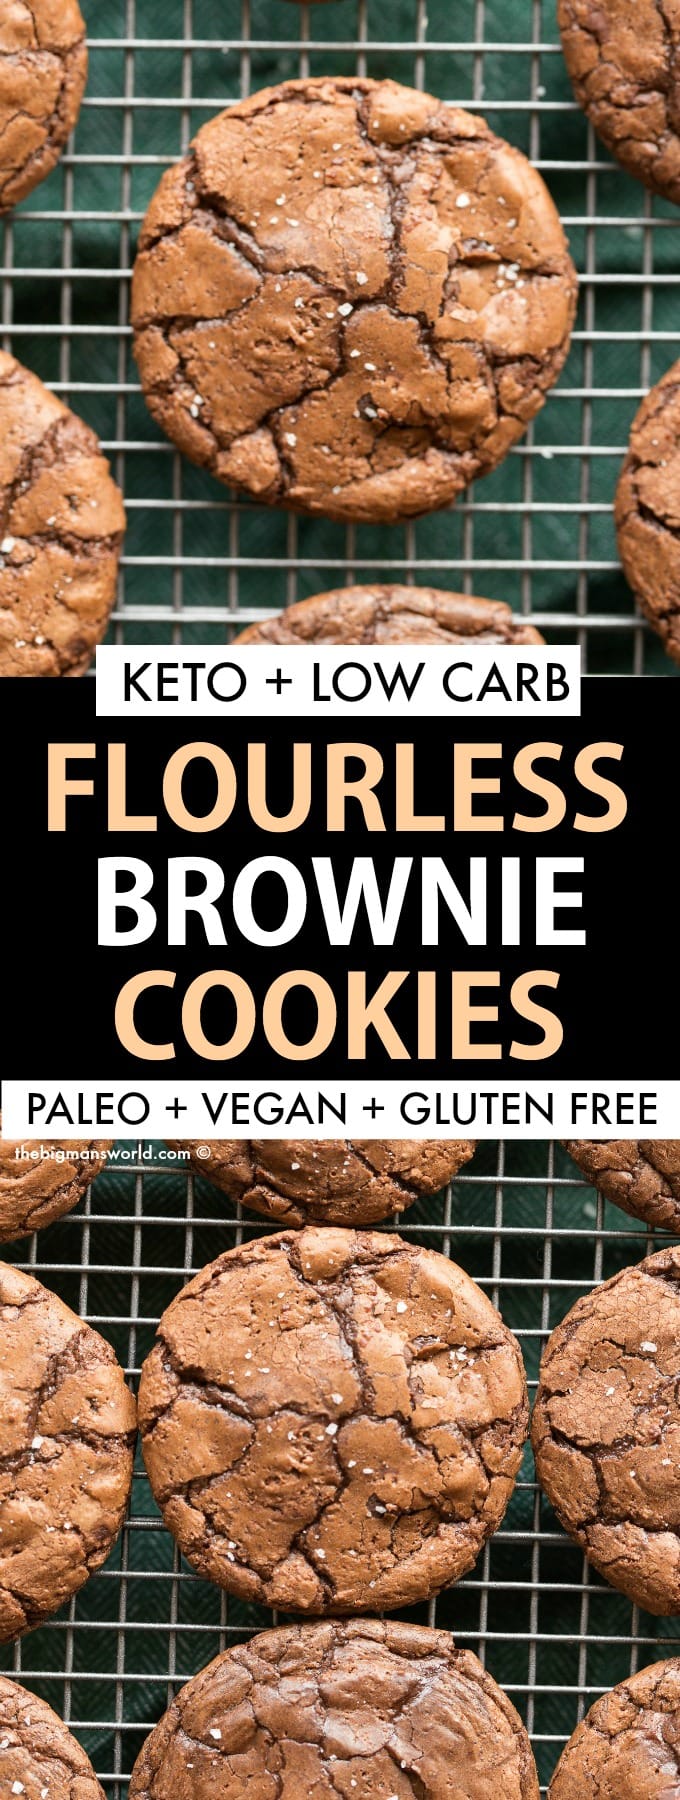 Healthy Keto and Low Carb Flourless Brownie Cookies made without sugar, without dairy and completely paleo and gluten free! 